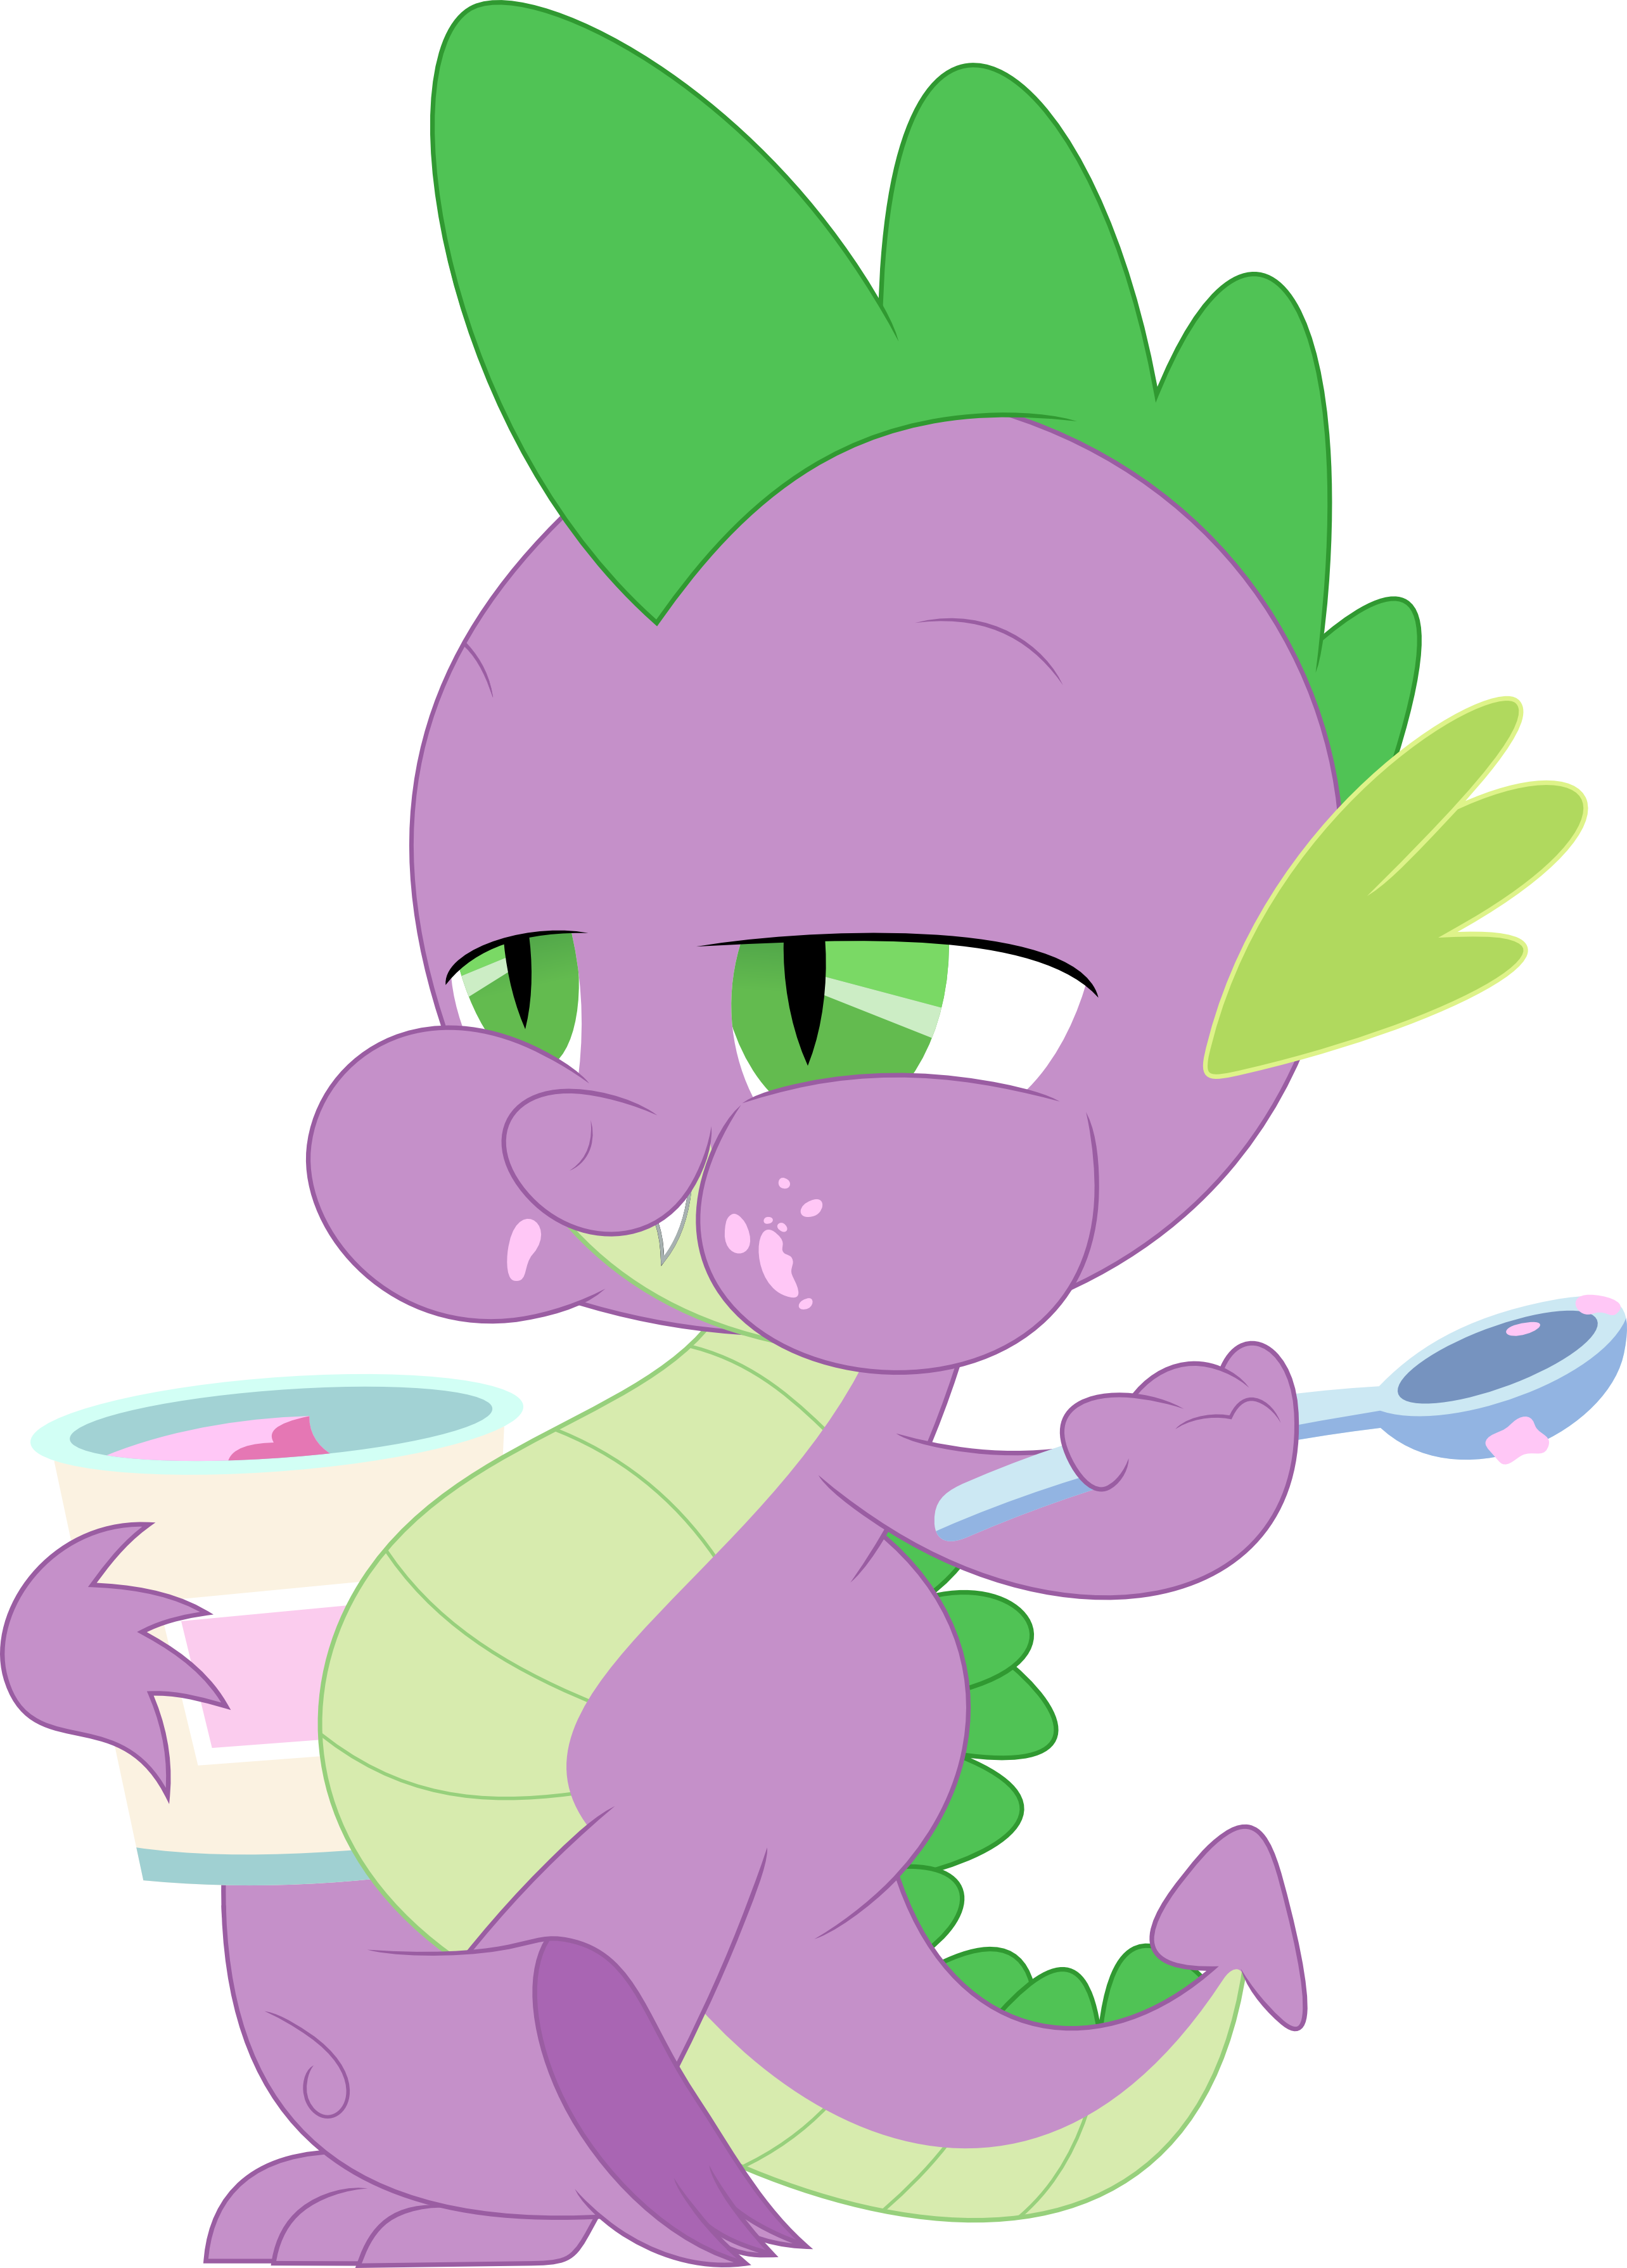 Dragons Eating Ice Cream Are Cool By Porygon2z - Dragon Eating Ice Cream (2568x3580)